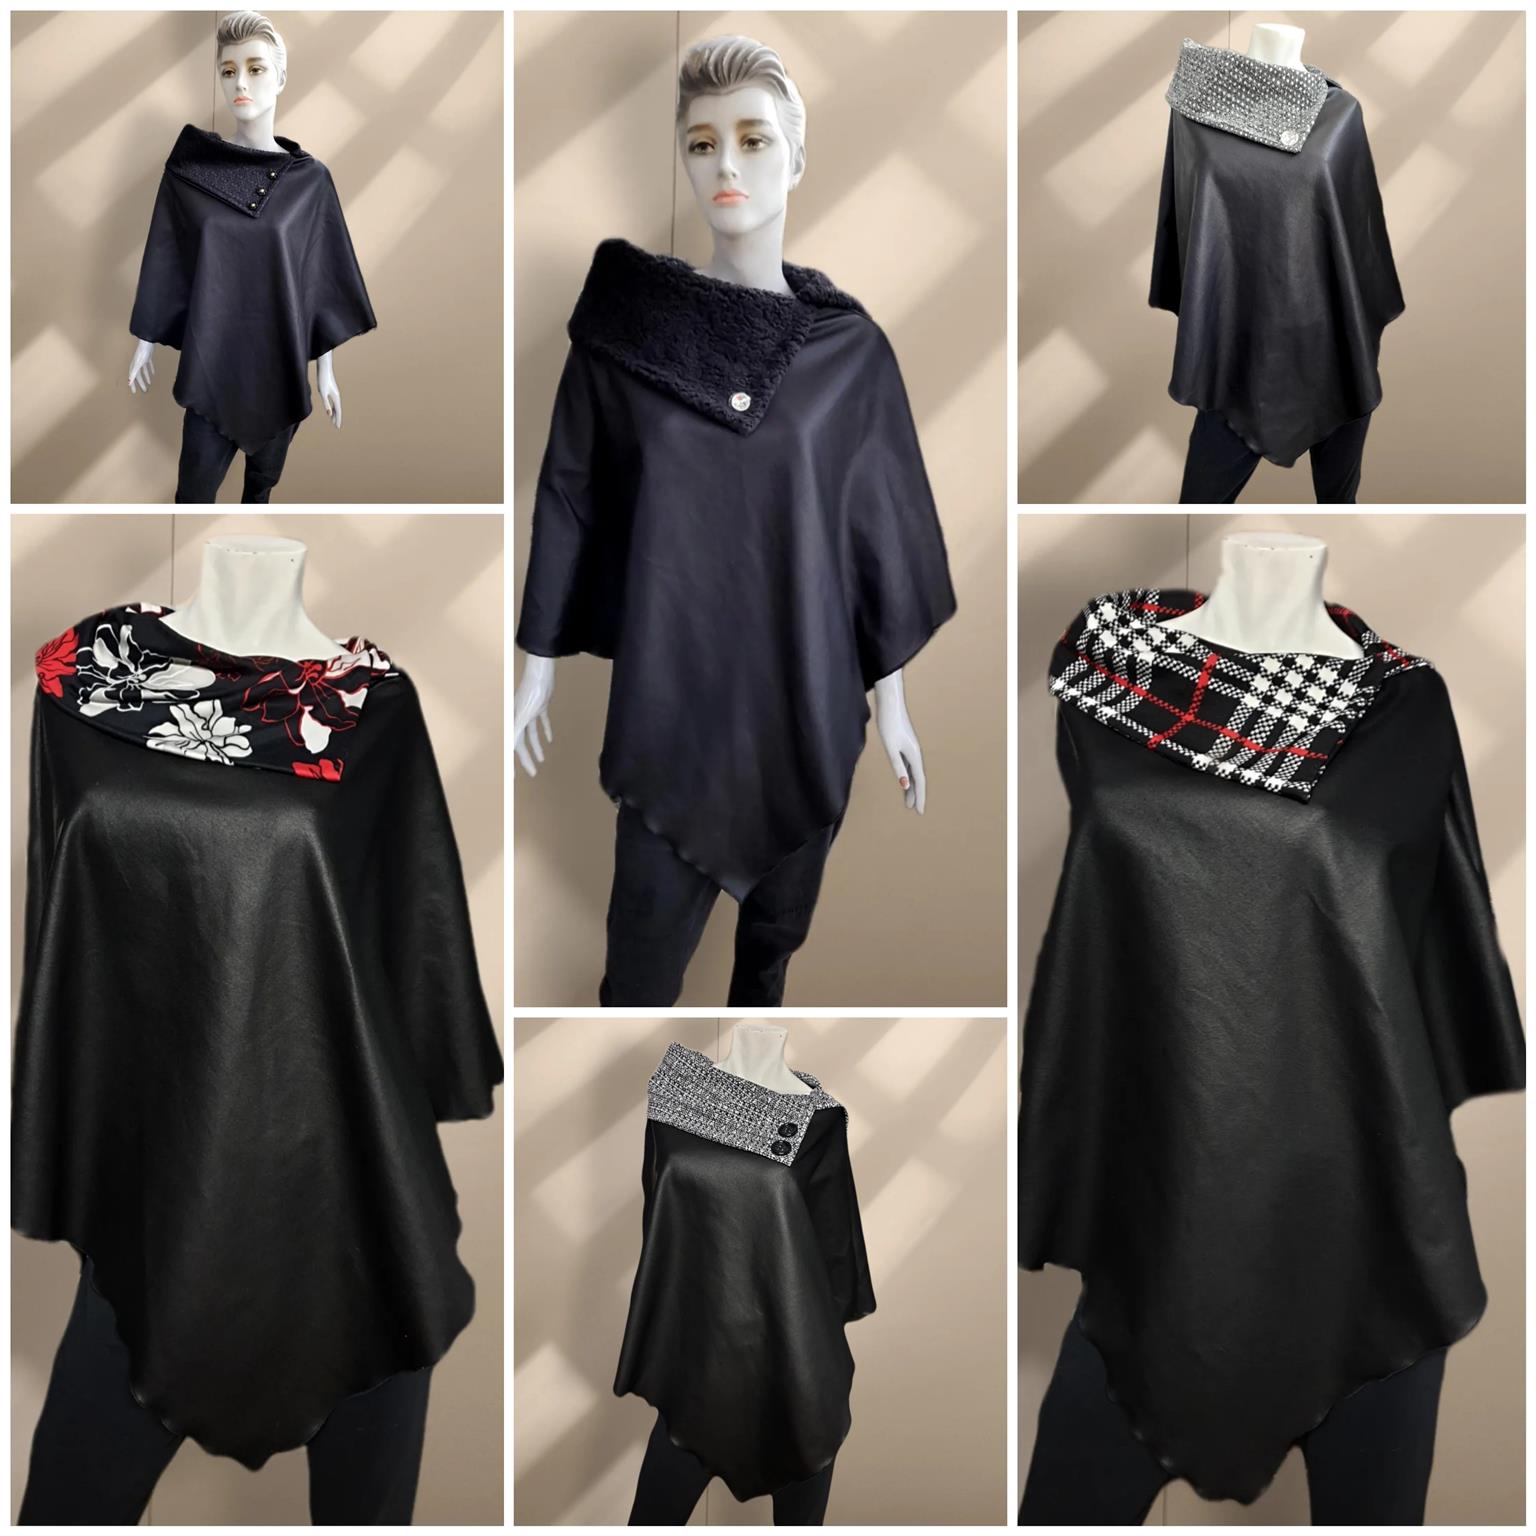 Women & men's clothing, ponchos and scarf necklaces, all ages